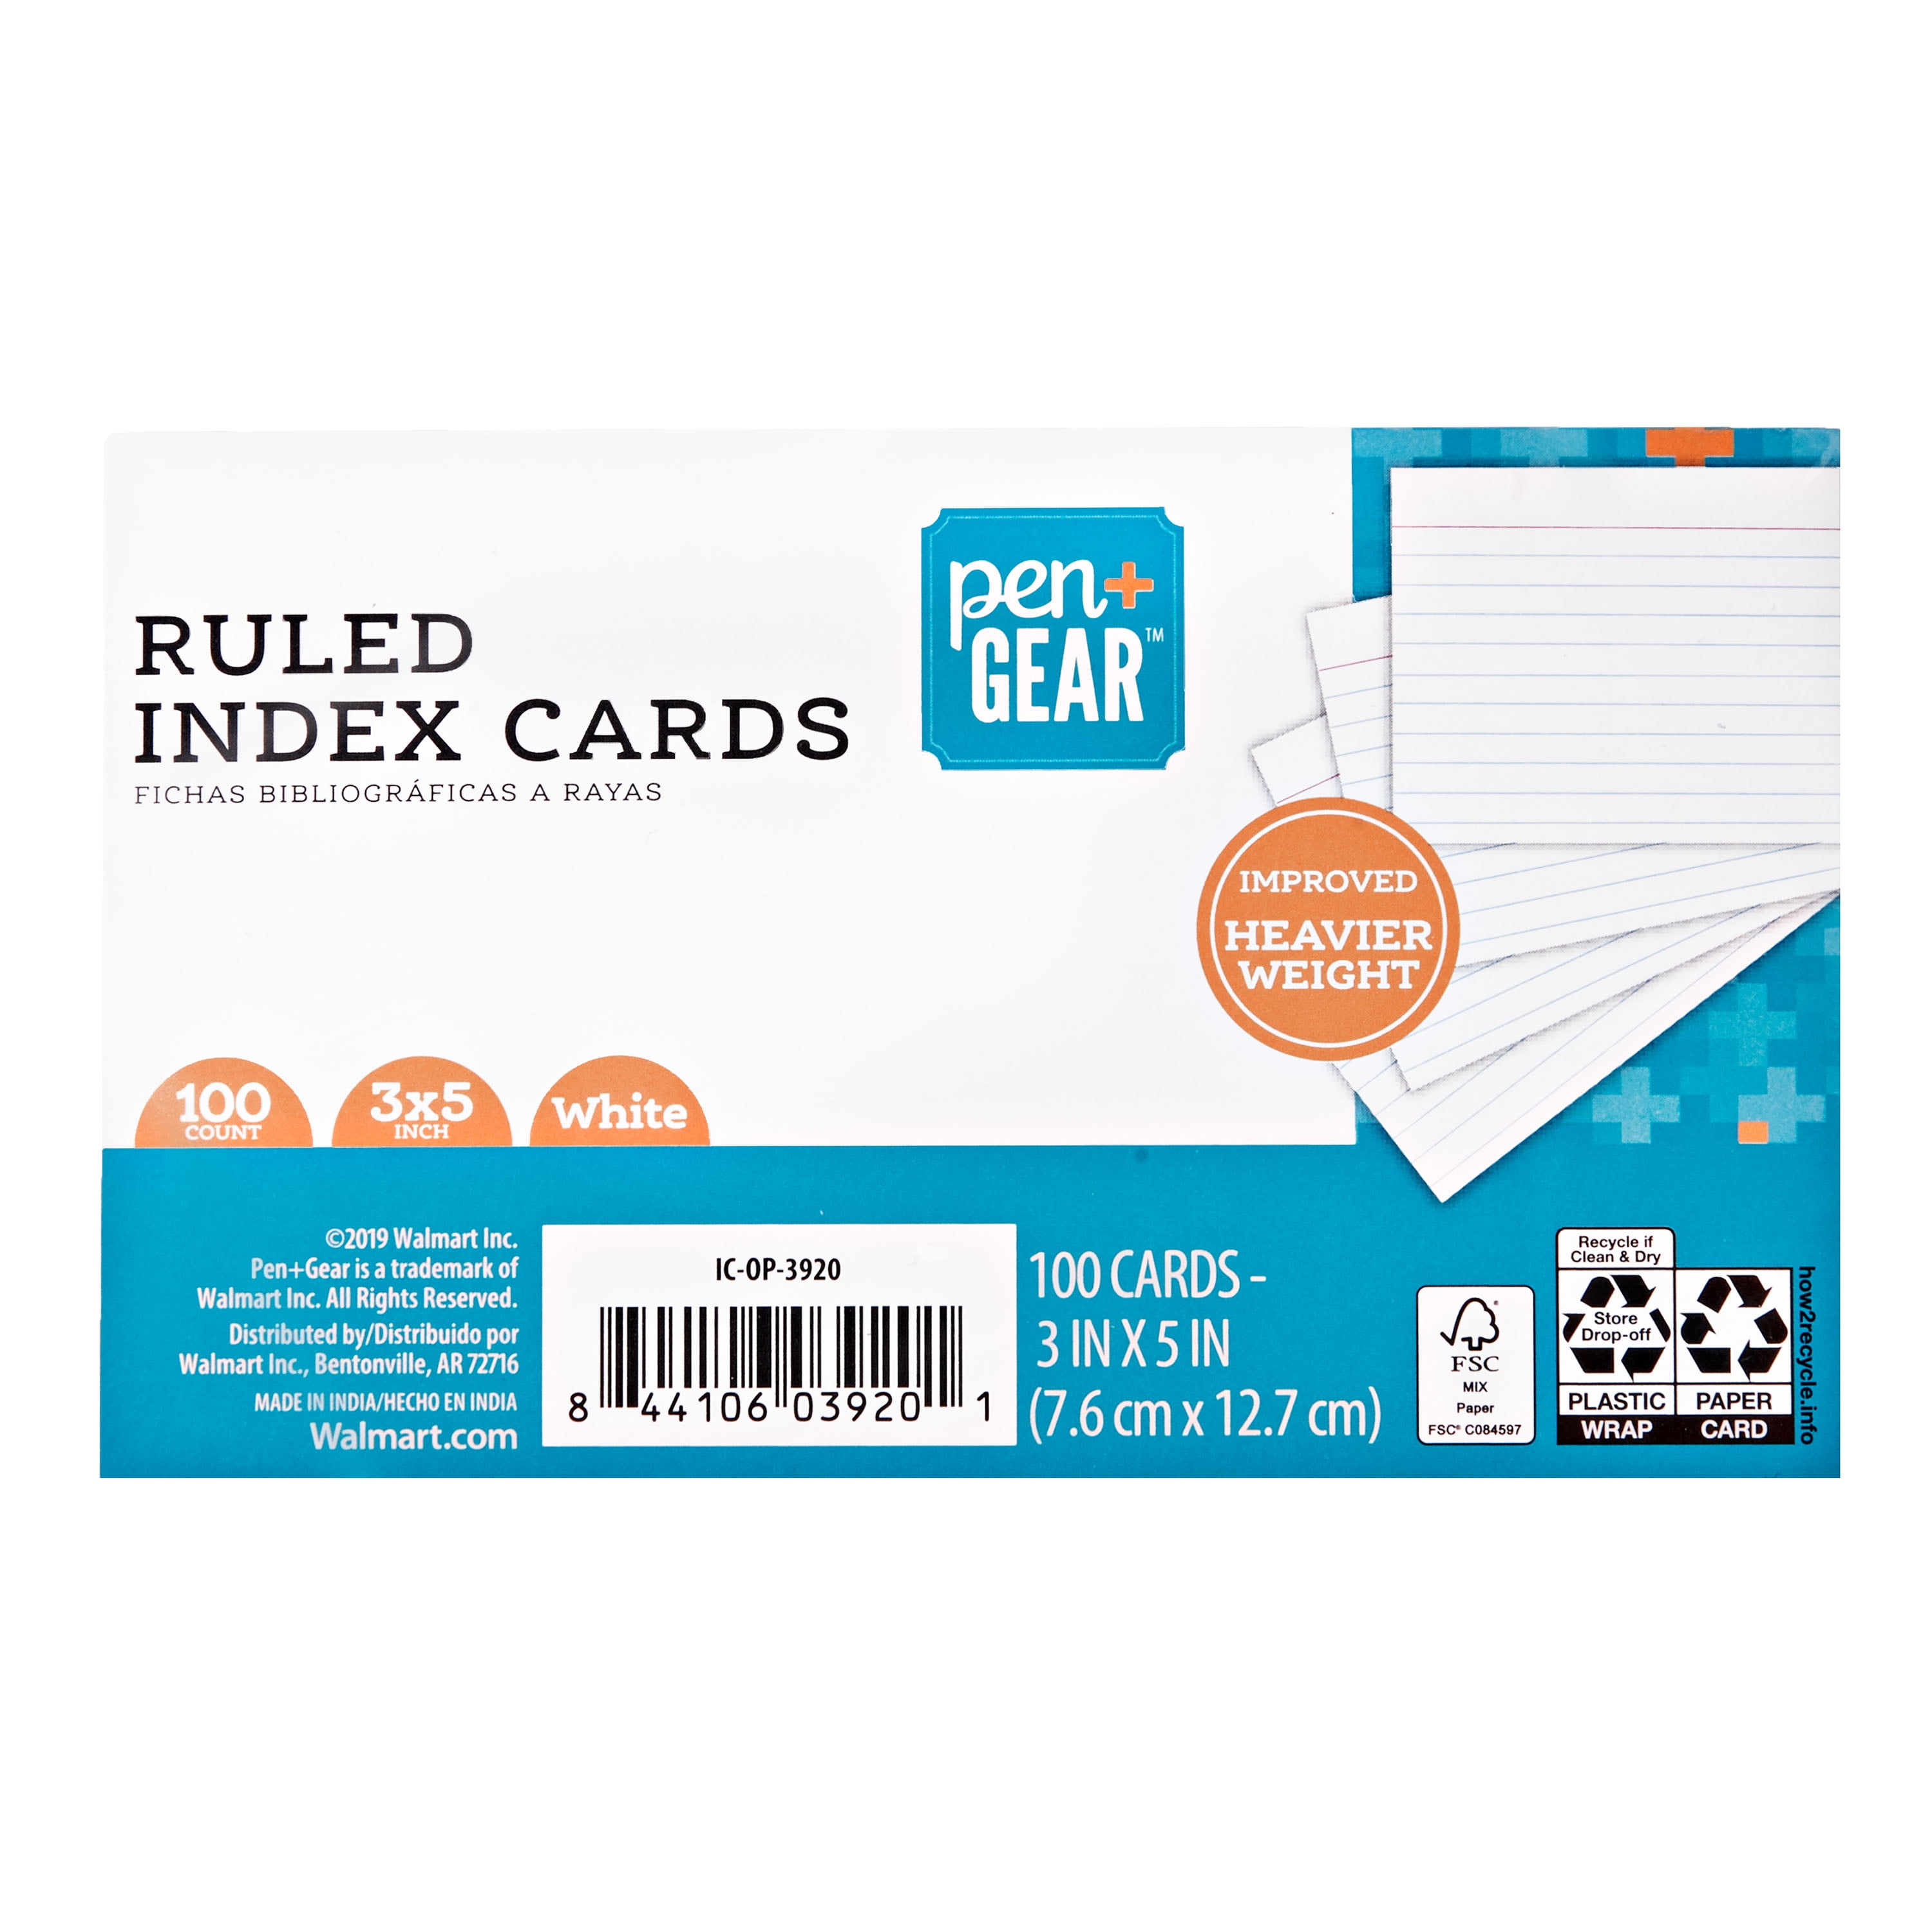 100 Count 63352 White 3 x 5 Note Cards Mead Index Cards #.1 Pack - White Plain